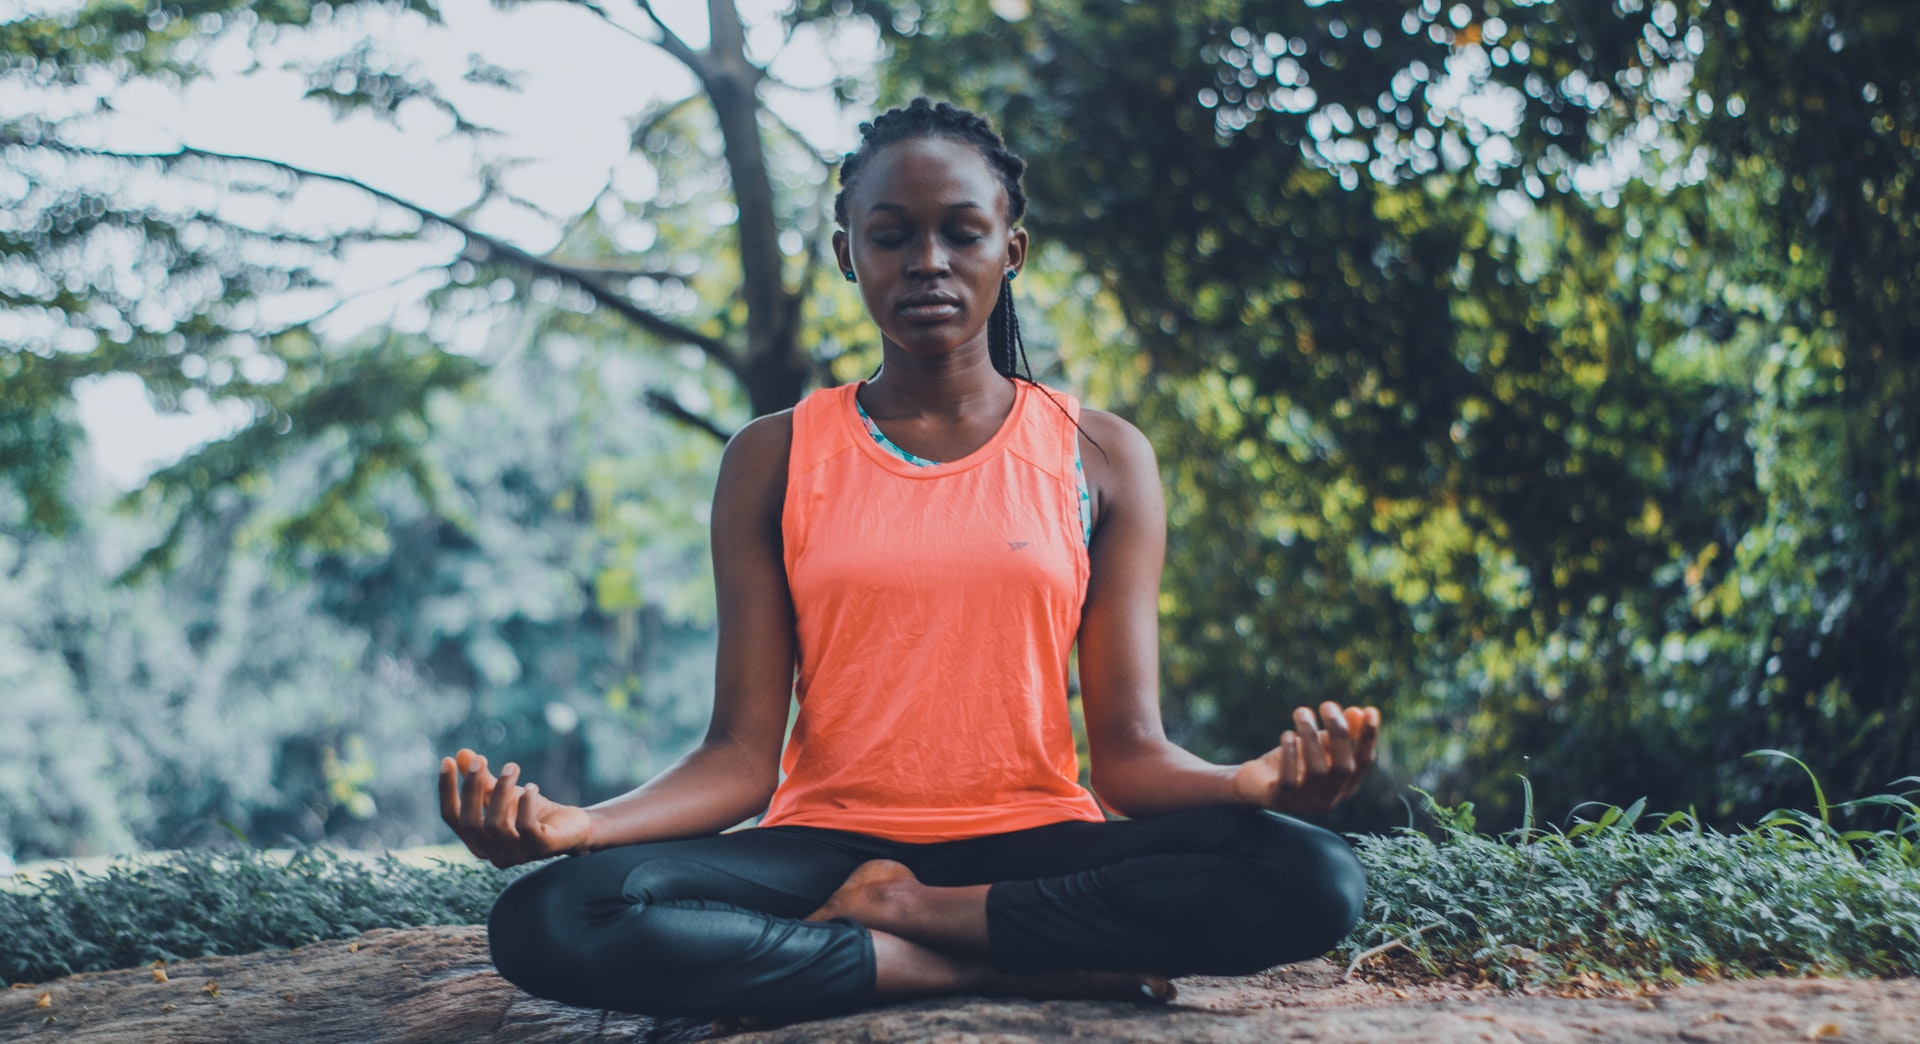 Three (3) Easy Ways to Relax Now |<img data-img-src='https://livefreecounsellingservices.com/wp-content/uploads/2020/07/meditating.jpg' alt='What are some easy ways to relax' /><h3>Here are some simple methods to unwind and relax:</h3><ul><li><strong>Deep Breathing: </strong>Practice profound breath sports to quiet the brain and body. Take slow, full breaths in through your nose, save for certain seconds, after which breathe out leisurely through your mouth. Rehash various times to sell unwinding and decrease uneasiness.</li></ul><p> </p><ul><li><strong>Meditation: </strong>Put in no time at all every day contemplating to calm the brain and advance inside harmony. Find a cushty job, close to your eyes, and mindfulness on your breath or a loosening up mantra. Reflection can assist with lessening pressure, improve consideration, and design by and large close to home pleasantly being.</li></ul><p> </p><ul><li><strong>Take a Walk: </strong>Investing energy outside and taking a walk can assist with cleaning up your contemplations and reducing stress. Go for a relaxed stroll in nature, inhale inside the spotless air, and revel in the sights and hints of your environmental elements. Strolling likewise can build temper and increment energy degrees.</li></ul><p> </p><ul><li><strong>Listen to Music: </strong>Standing by listening to mitigating music will have a loosening up influence on the psyche and casing. Make a playlist of your top quieting tunes or instrumental music and really try to loosen up while tuning in. Music has the solidity to lessen strain, raise temper, and sell rest.</li></ul><p> </p><ul><li><strong>Practice Yoga or Stretching: </strong>Participate in gentle yoga or extend actual games to send off nervousness and advance unwinding. Yoga presents, comprehensive of kid's posture, descending canine, and carcass present, can help stretch tight, strong tissues, further develop adaptability, and prompt a feeling of quiet.</li></ul><p> </p><ul><li><strong>Take a Warm Bath: </strong>Soaking in a warm bath can assist with calming broken down solid tissues and selling rest. Add a couple of Epsom salts or essential oils like lavender to embellish the quieting results. Permit yourself to completely unwind and loosen up as you douse yourself in the warm water.</li></ul><p> </p><p>Incorporating these simple rest procedures into your step-by-step routine can help diminish pressure, advance <a href=